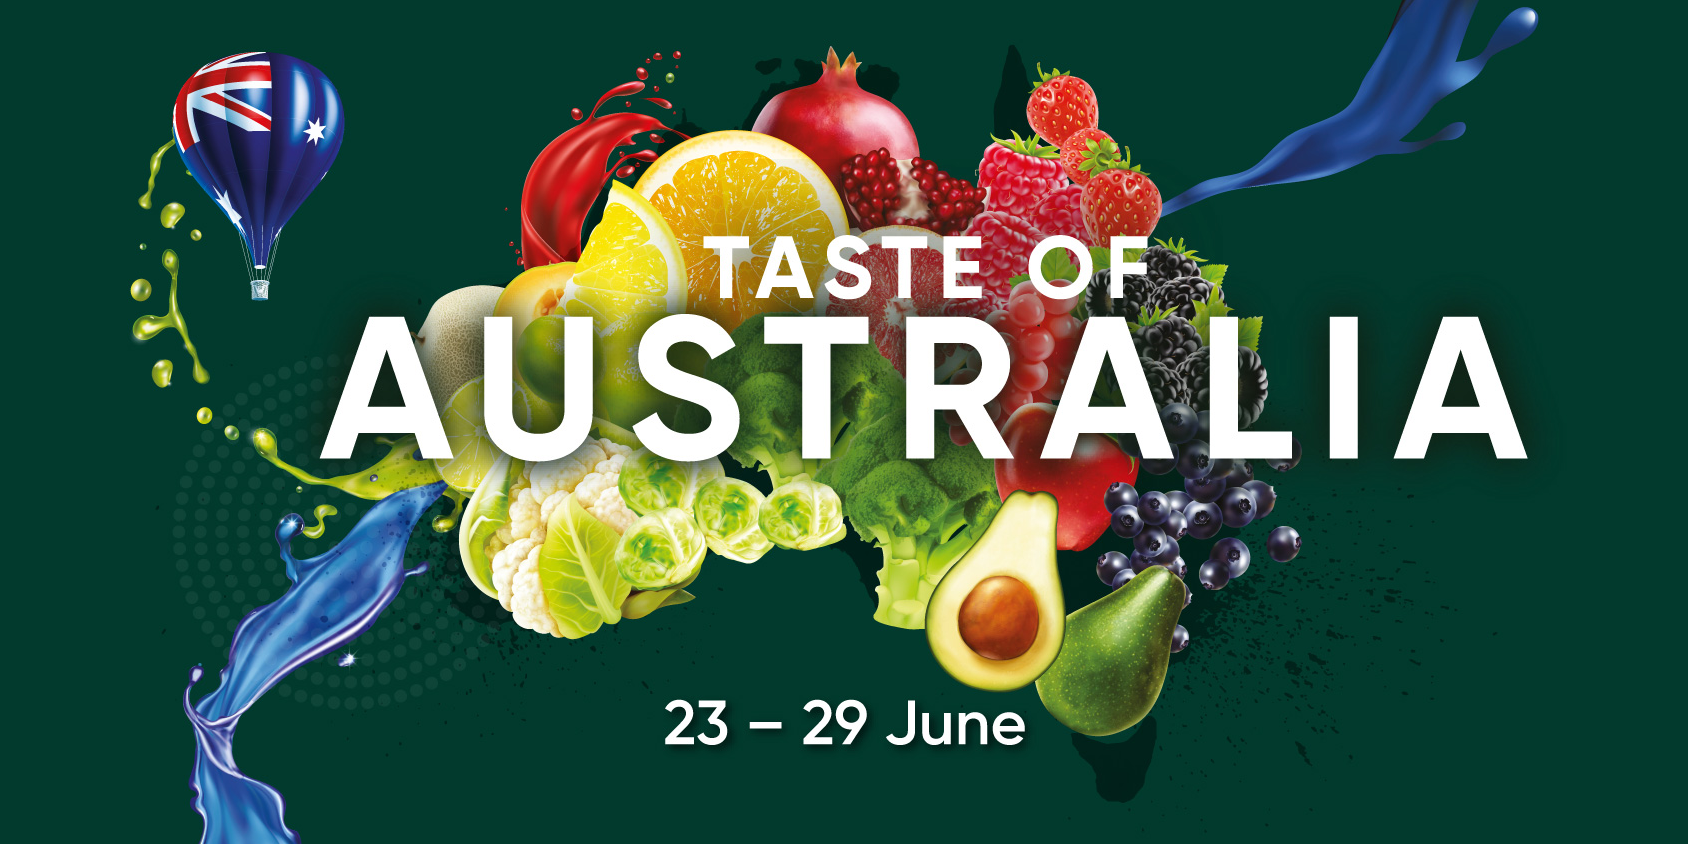 [23 – 29 June 2022 OFFER] Get a Taste of Australia at Cold Storage and CS Fresh!